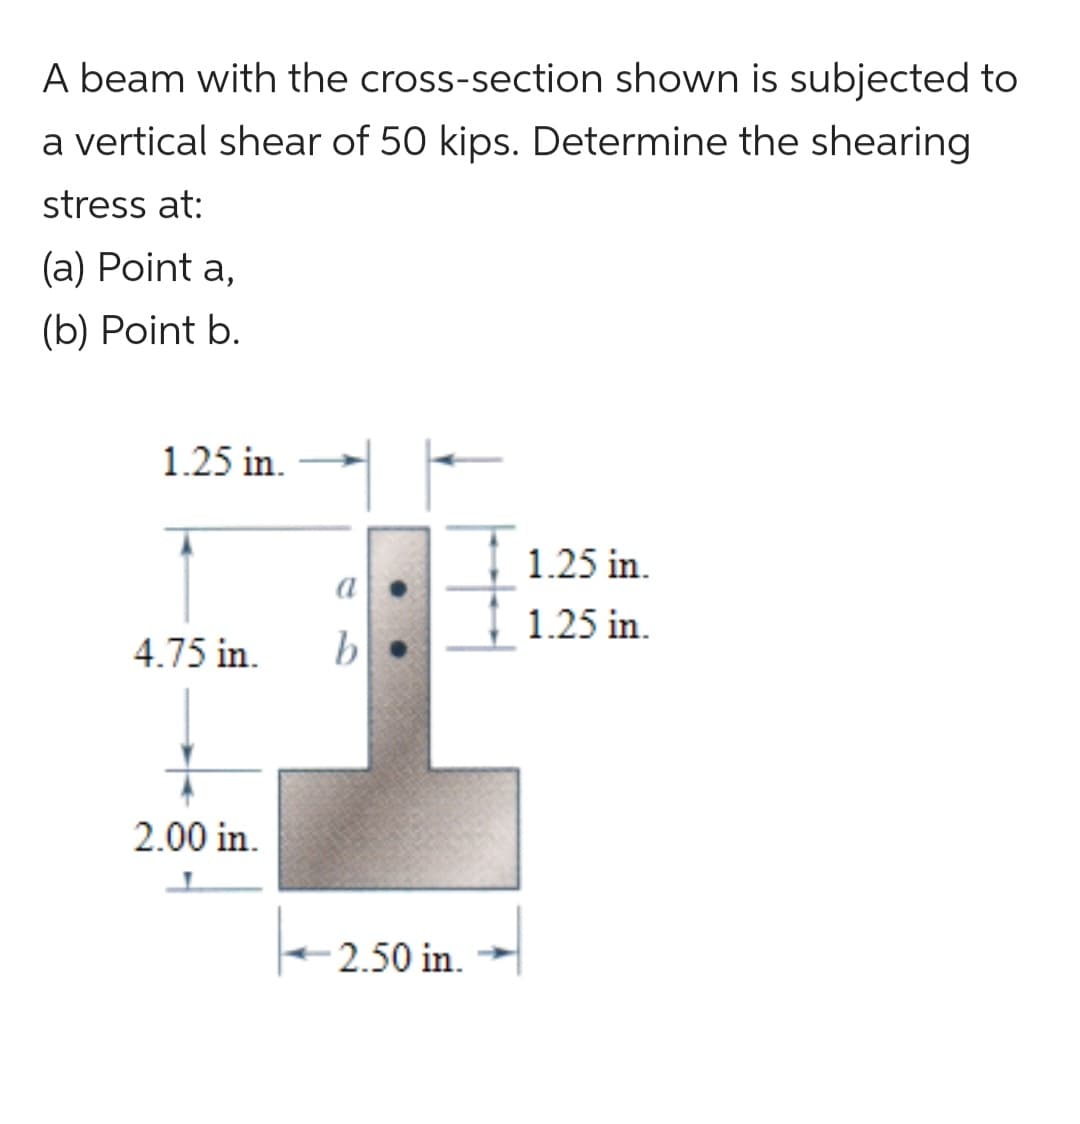 A beam with the cross-section shown is subjected to
a vertical shear of 50 kips. Determine the shearing
stress at:
(a) Point a,
(b) Point b.
1.25 in.
4.75 in.
2.00 in.
a
b
2.50 in.
1.25 in.
1.25 in.